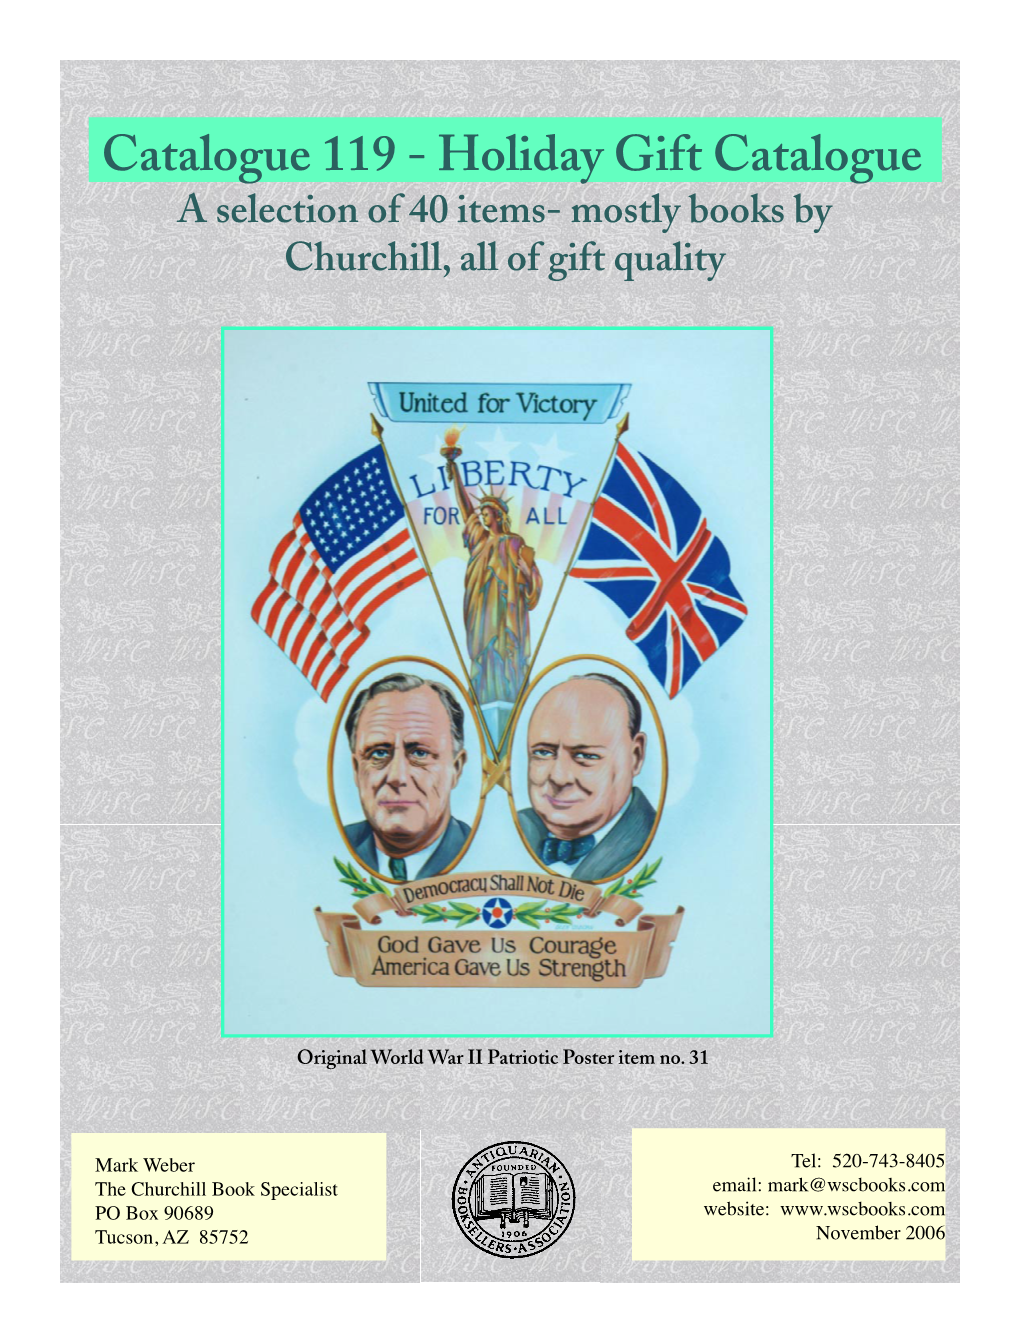 Catalogue 119 - Holiday Gift Catalogue a Selection of 40 Items- Mostly Books by Churchill, All of Gift Quality